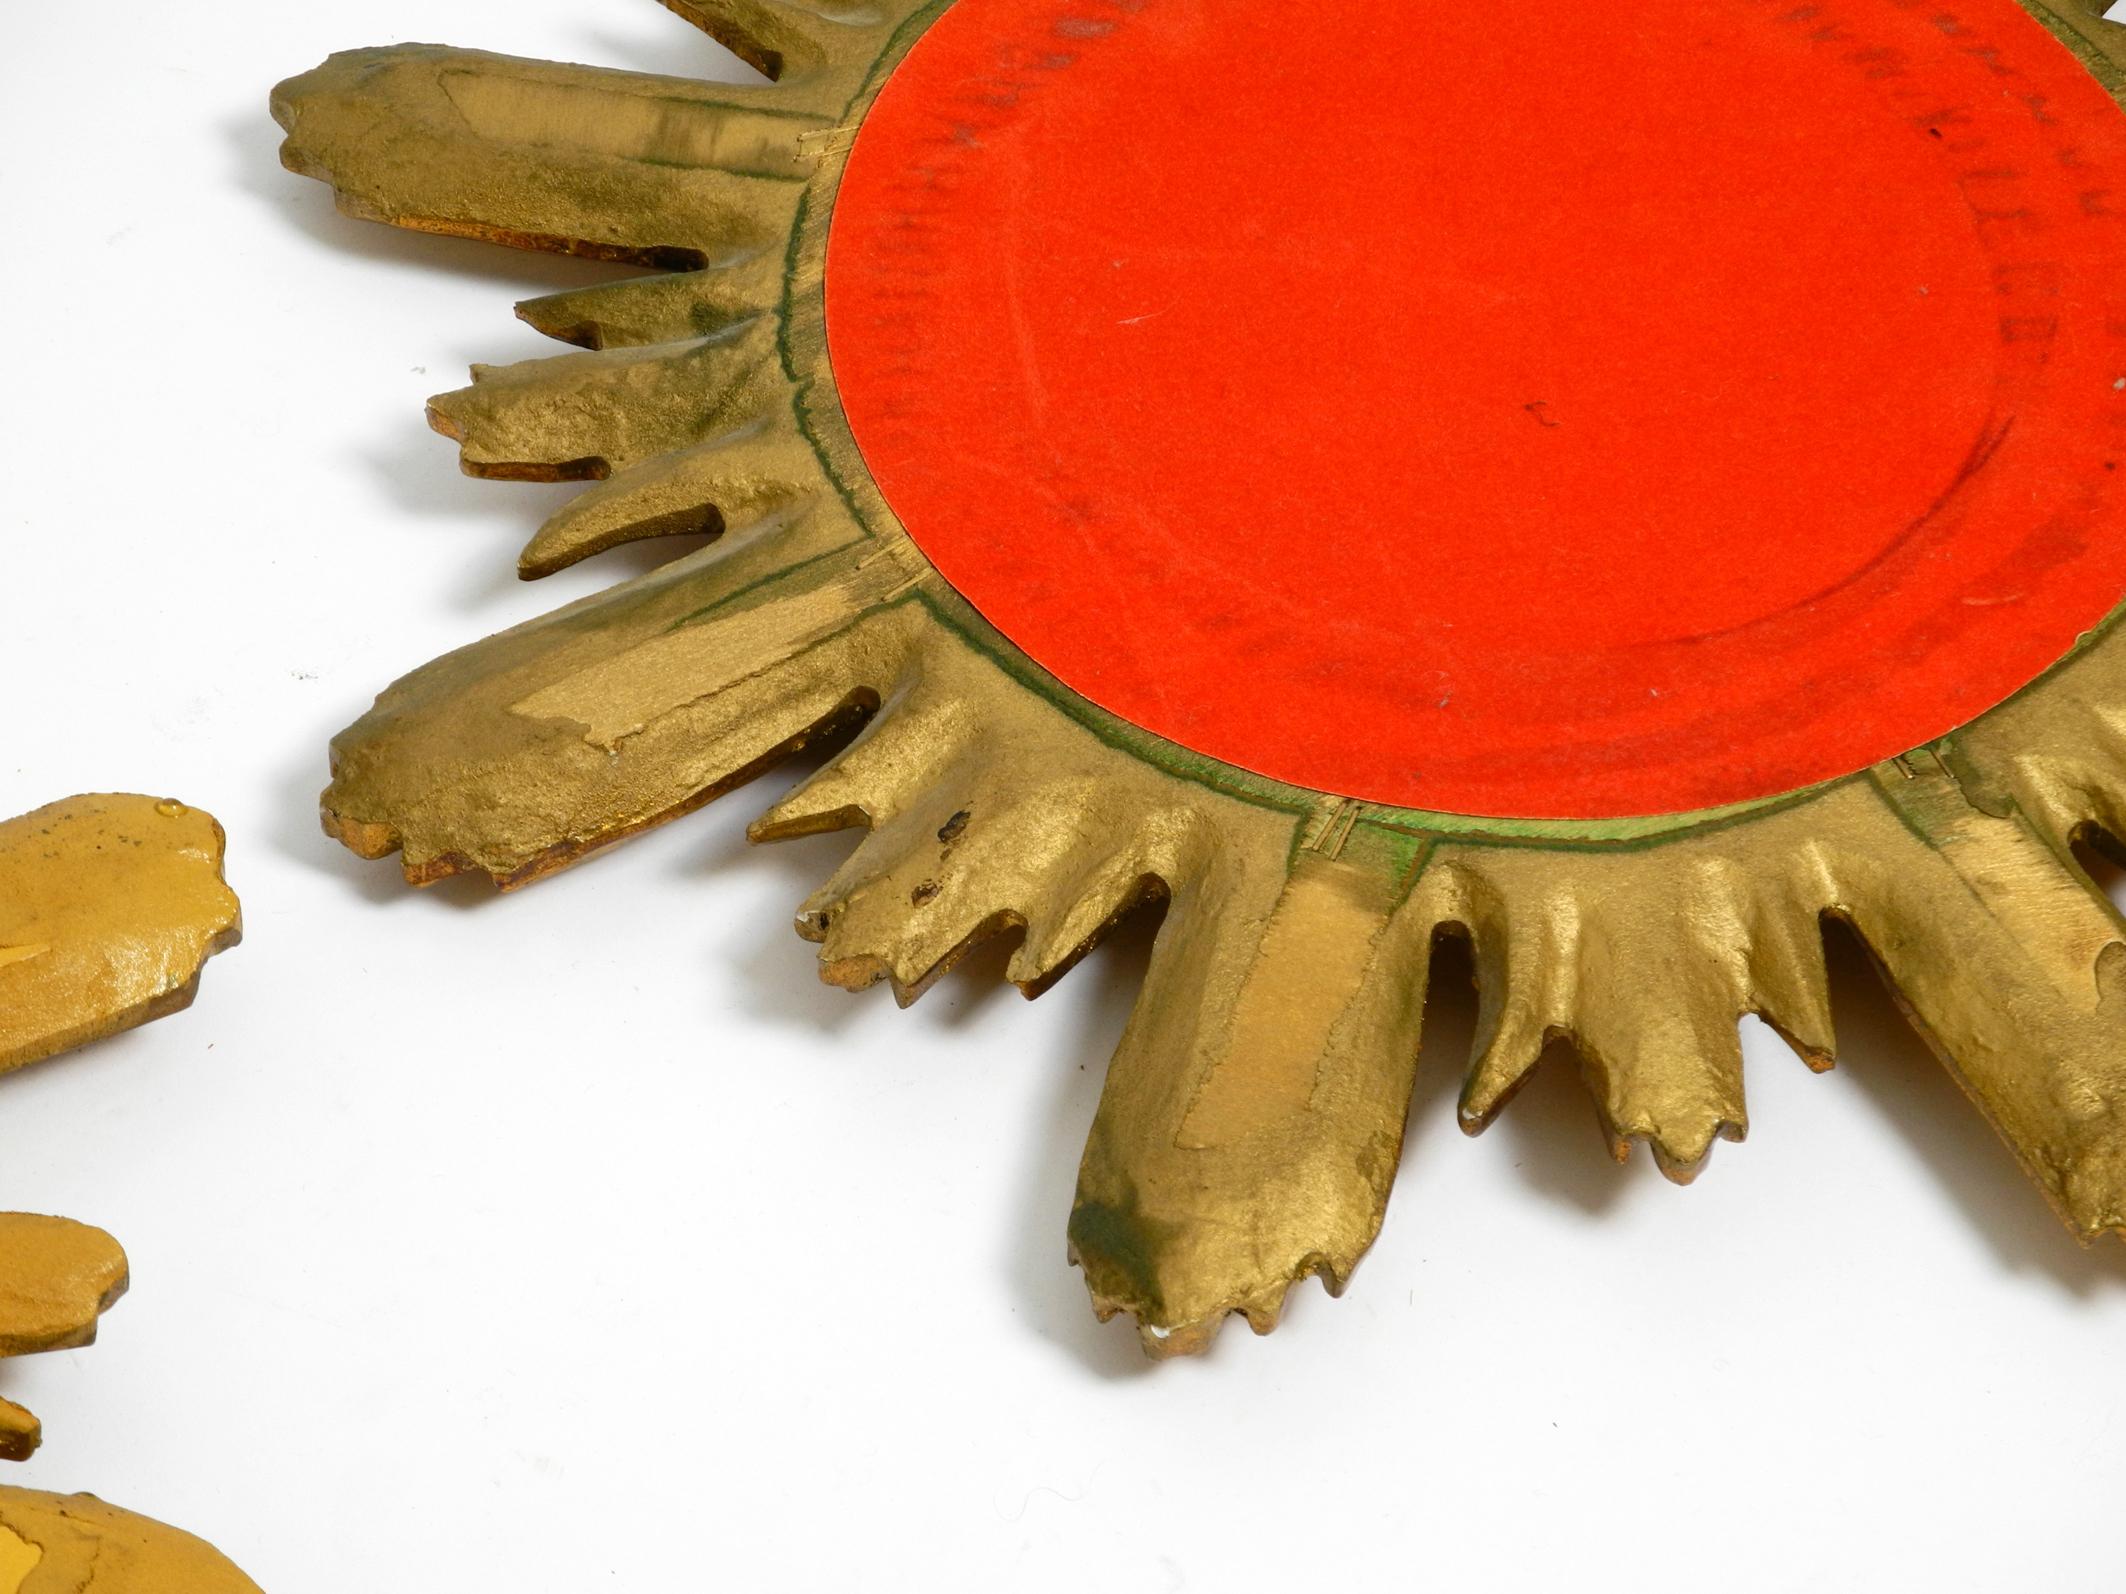 Pair of gold-plated mid-century sunburst wall mirrors made of wood and resin For Sale 6